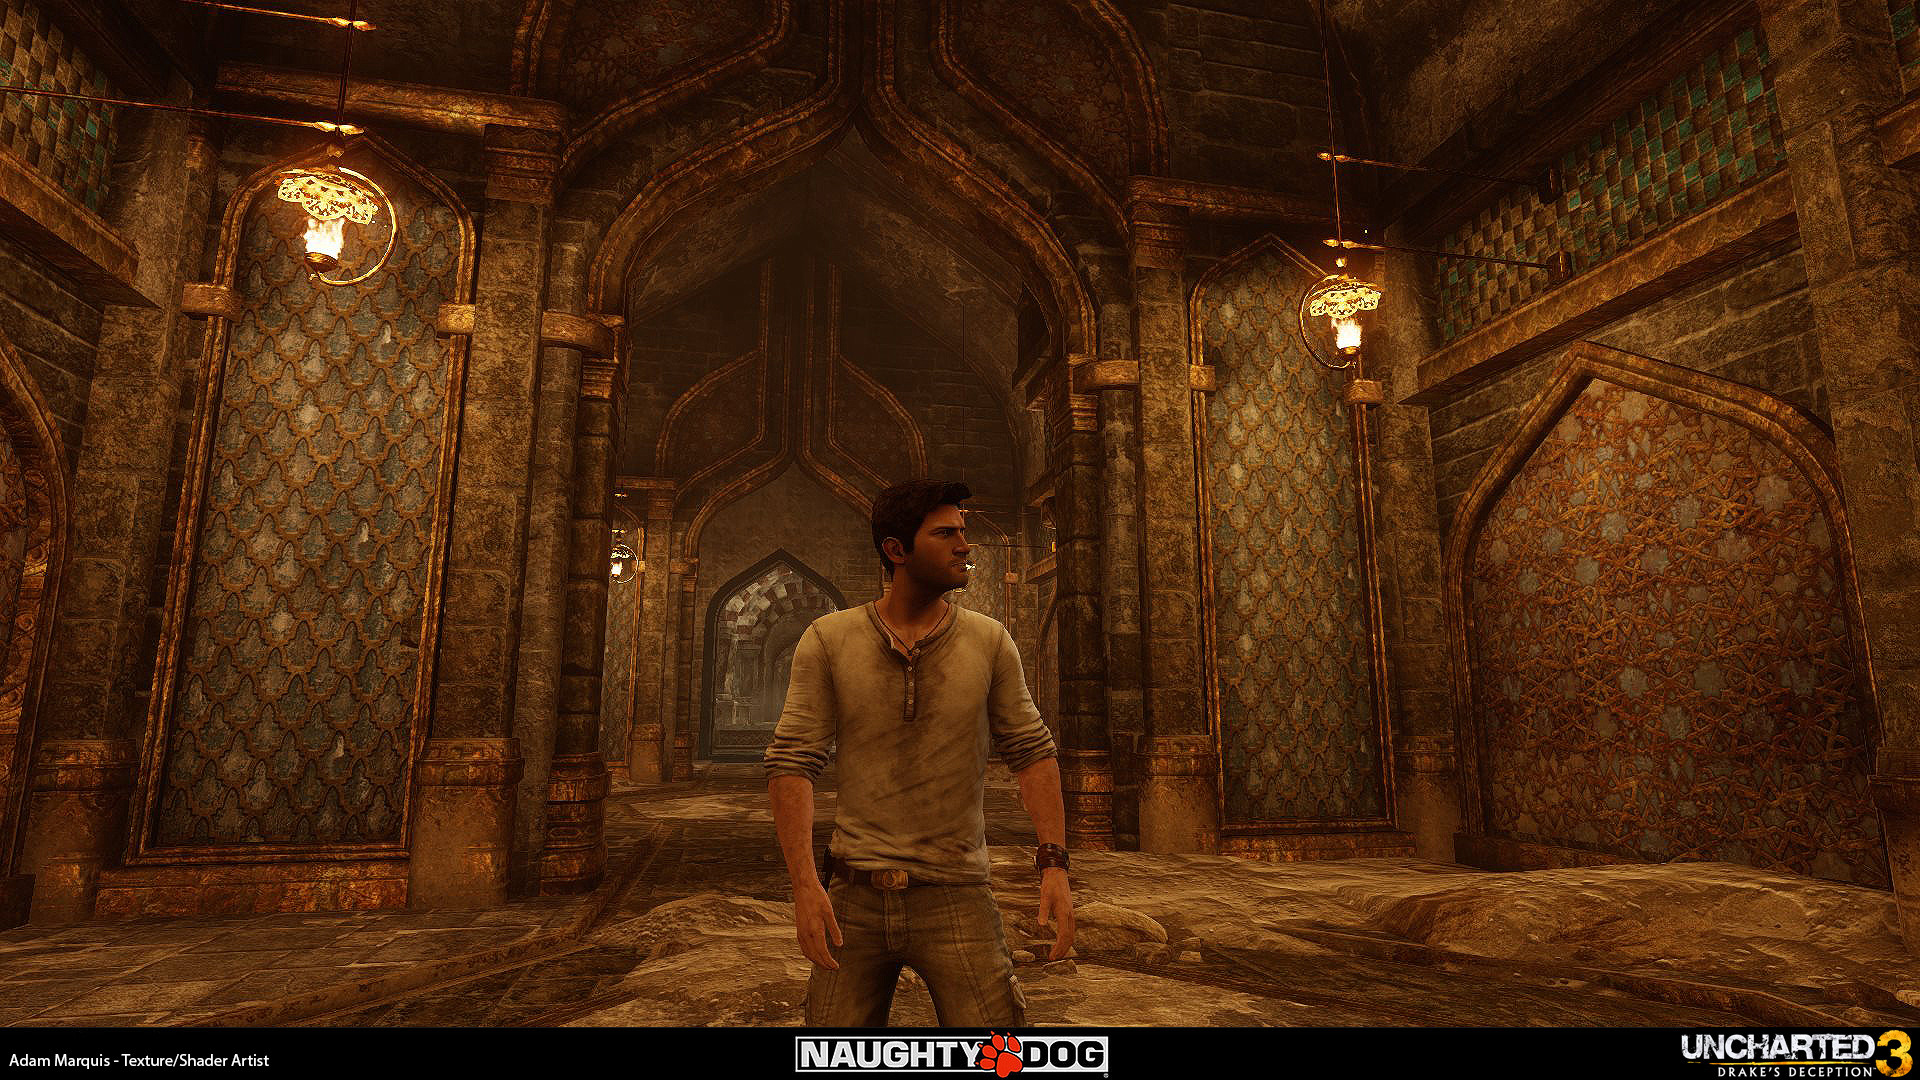 Pin on UNCHARTED 3: Drake's Deception